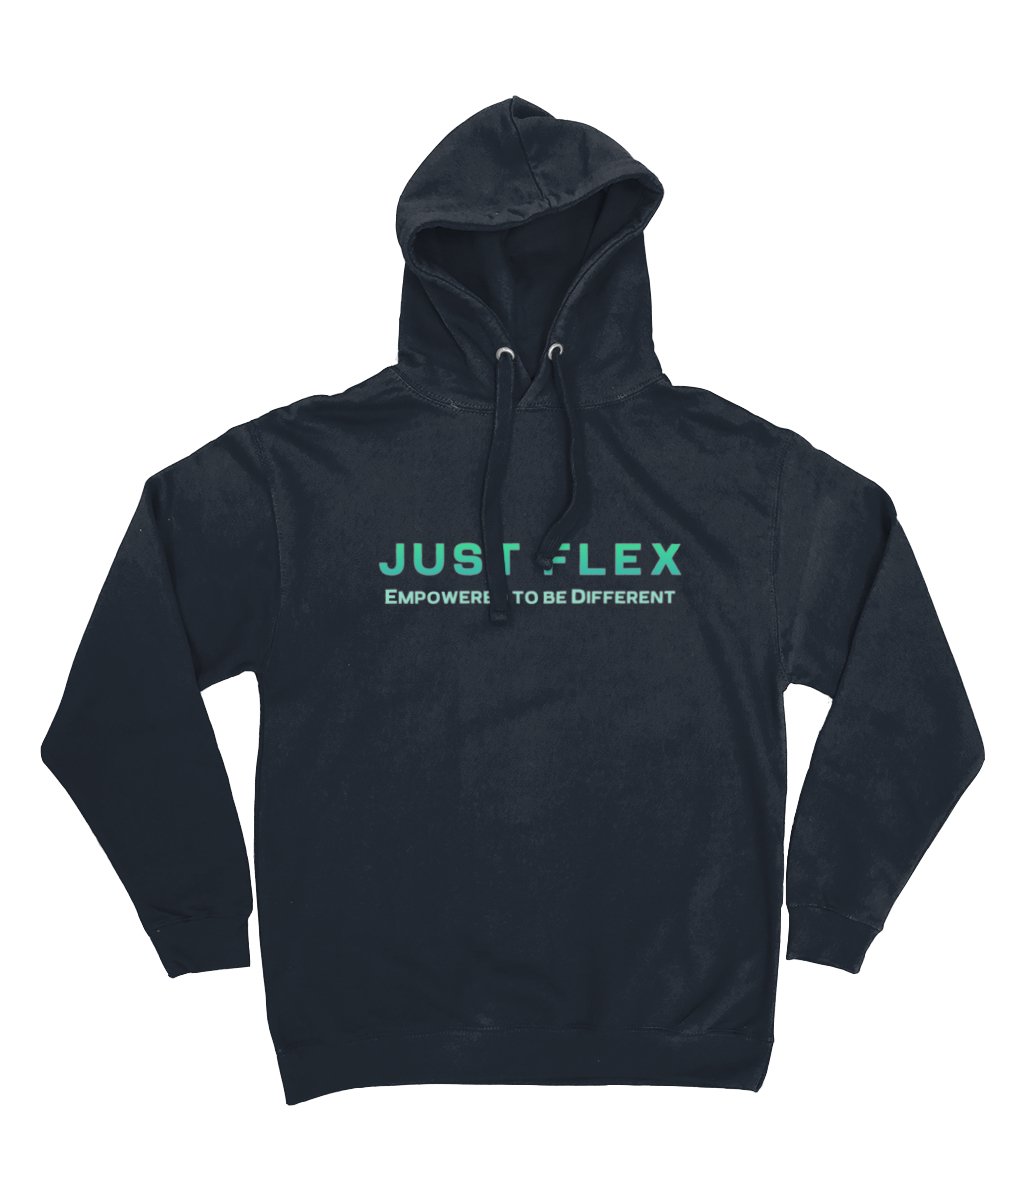 Just Flex - Empowered To Be Different Unisex Epic Print Hoodie